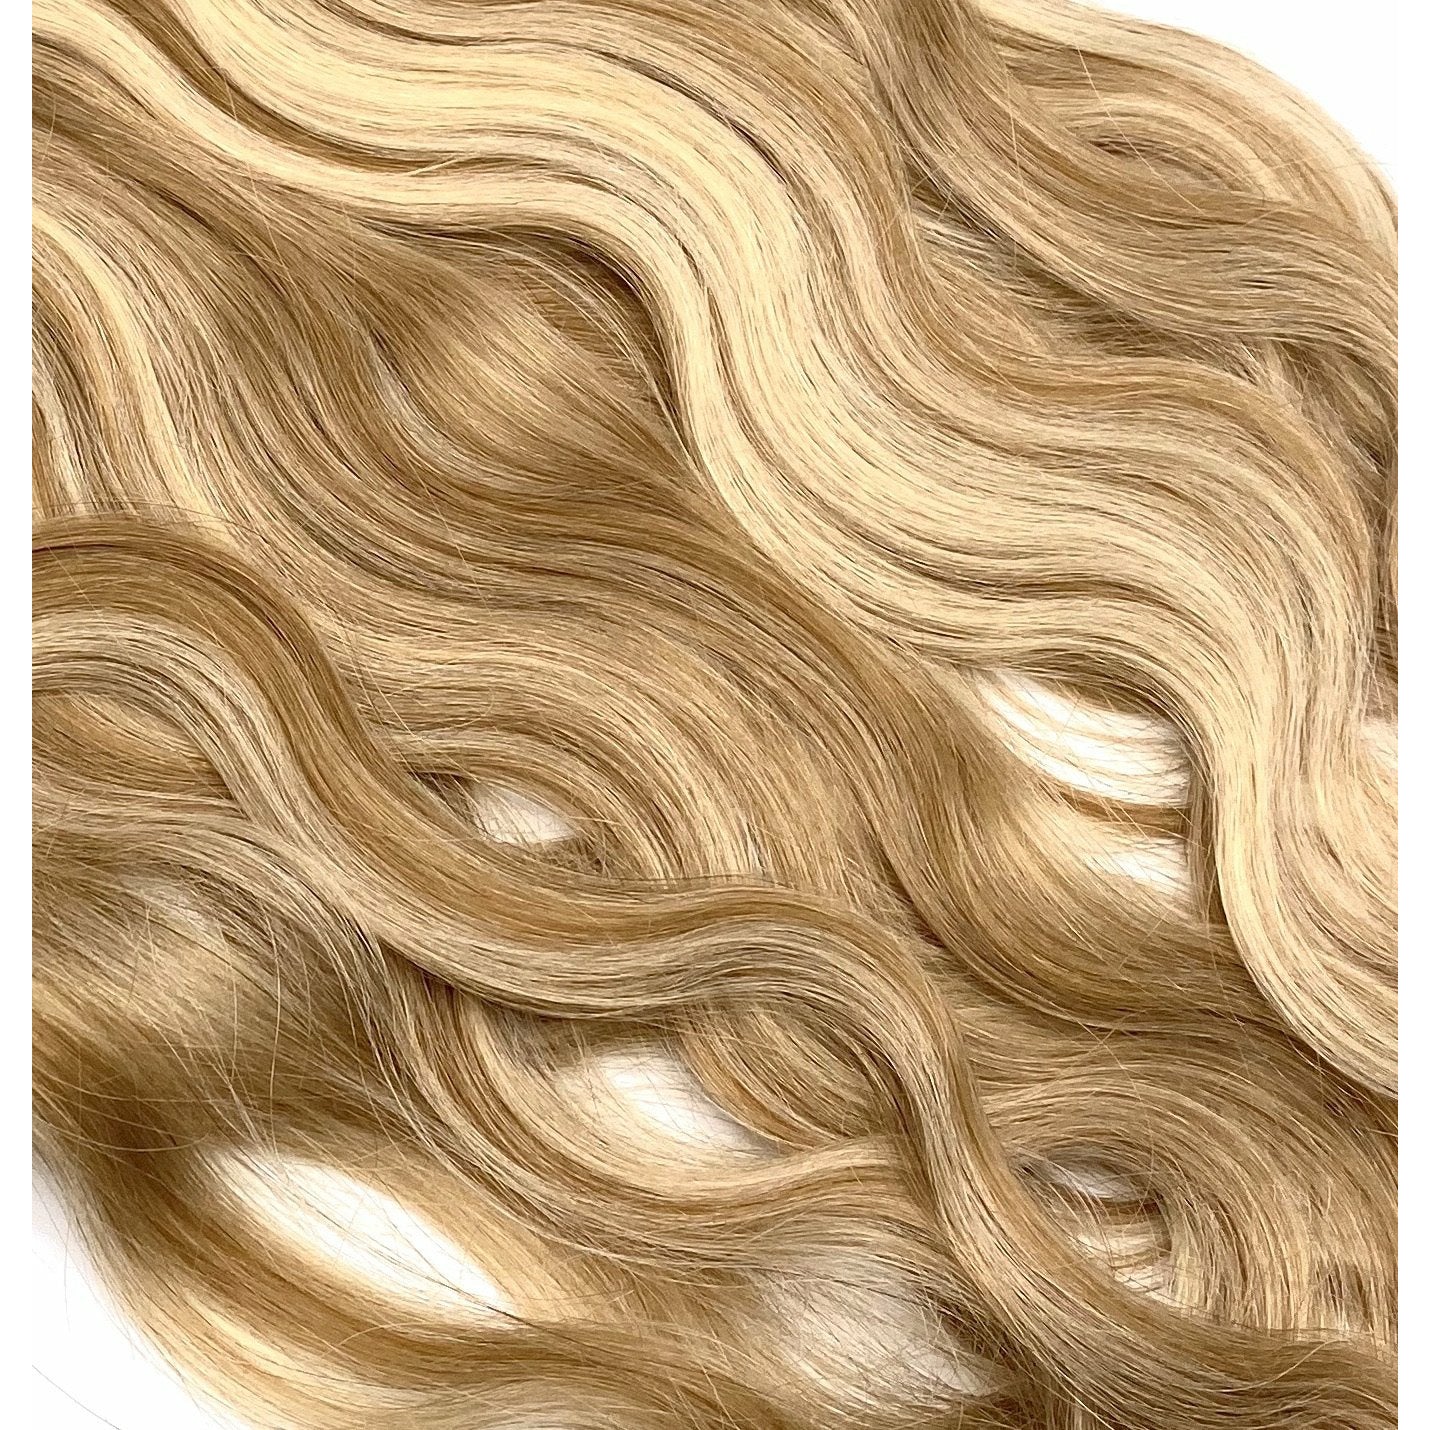 VIP M-Tip System (Tape extensions 100 strands) / Wavy 18" - VIP Extensions